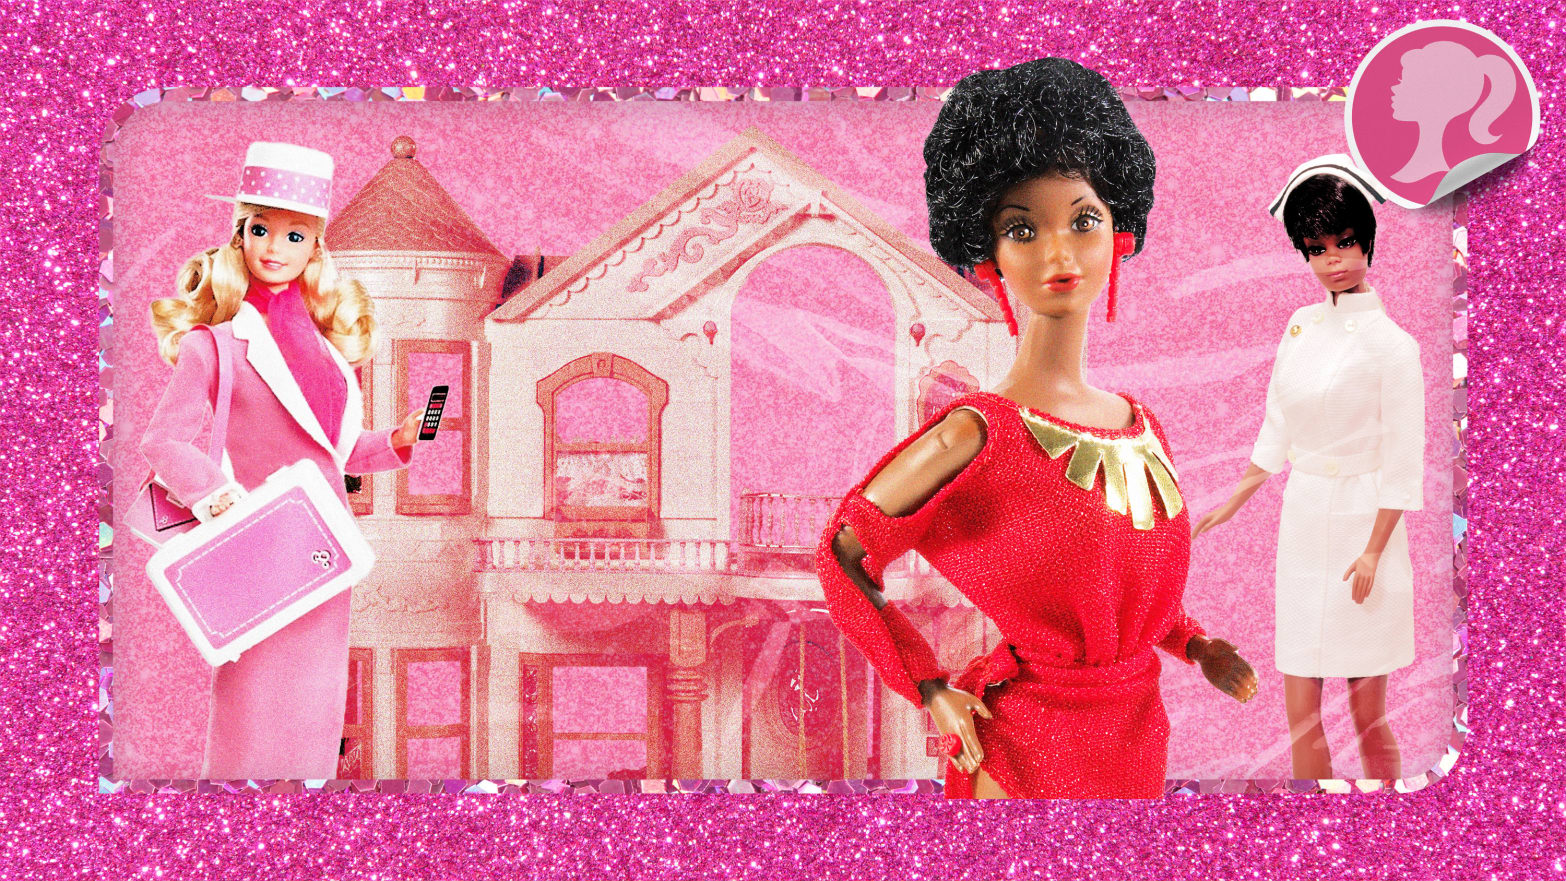 An illustration including Toy Barbie Dolls and the 1998 Barbie Deluxe Dreamhouse